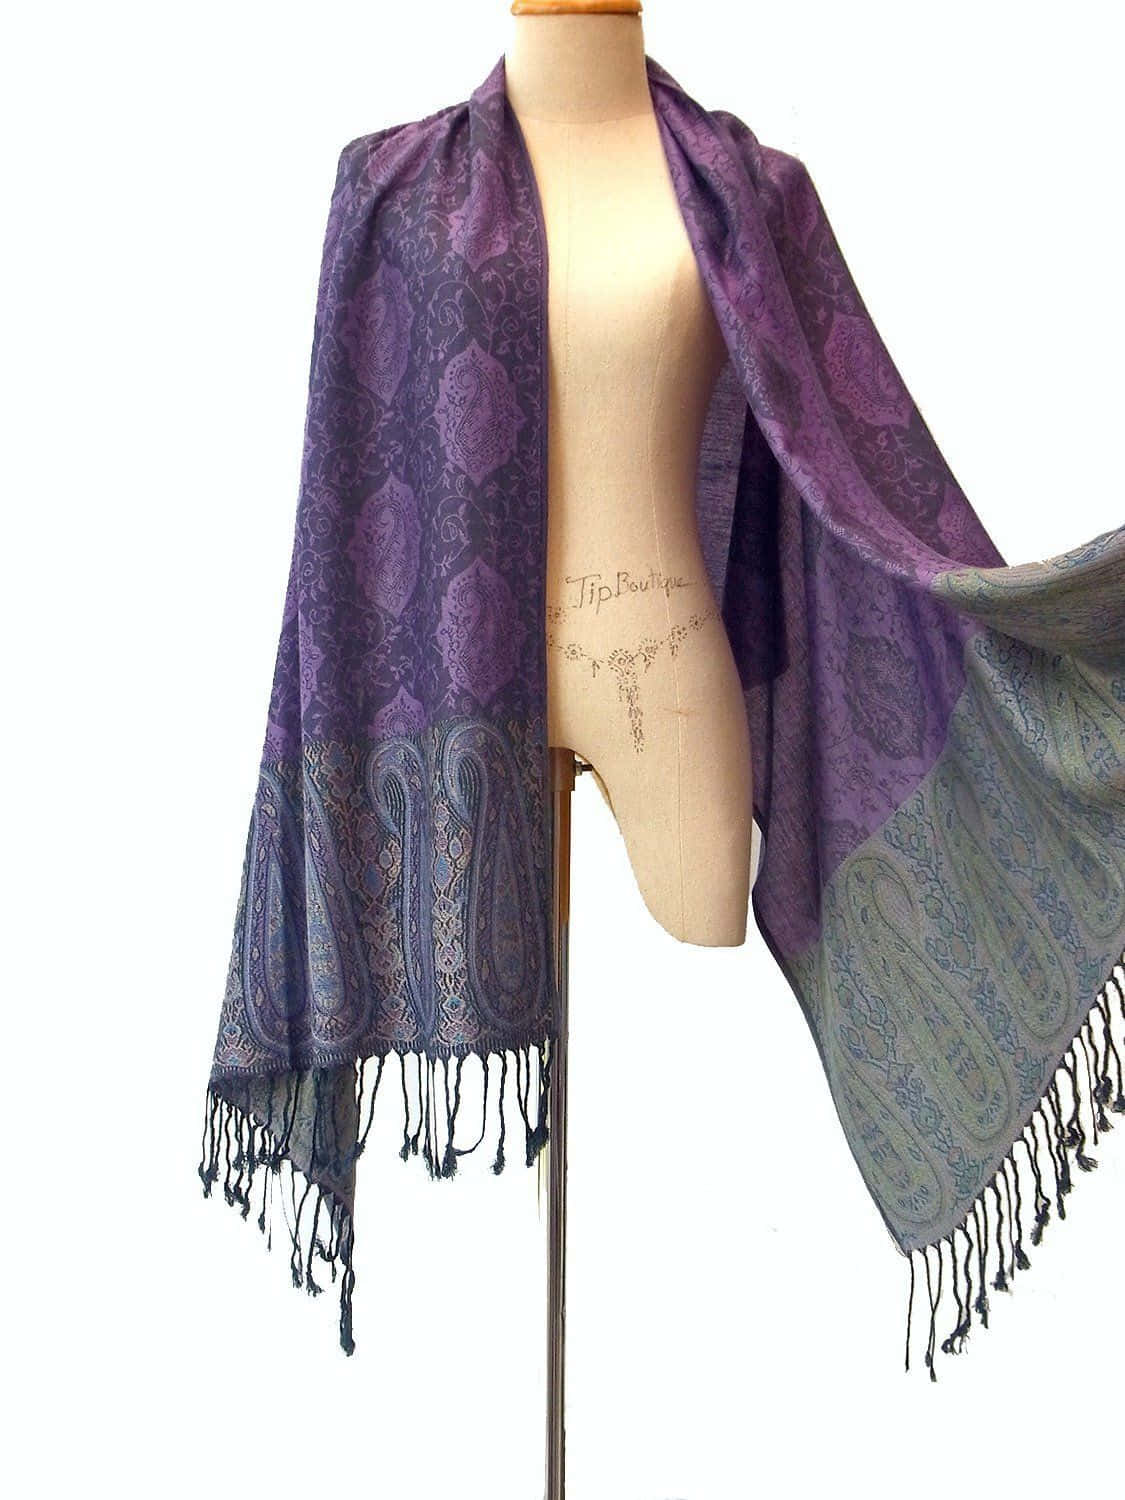 Stay Stylish&Cozy with a Purple Scarf Wallpaper